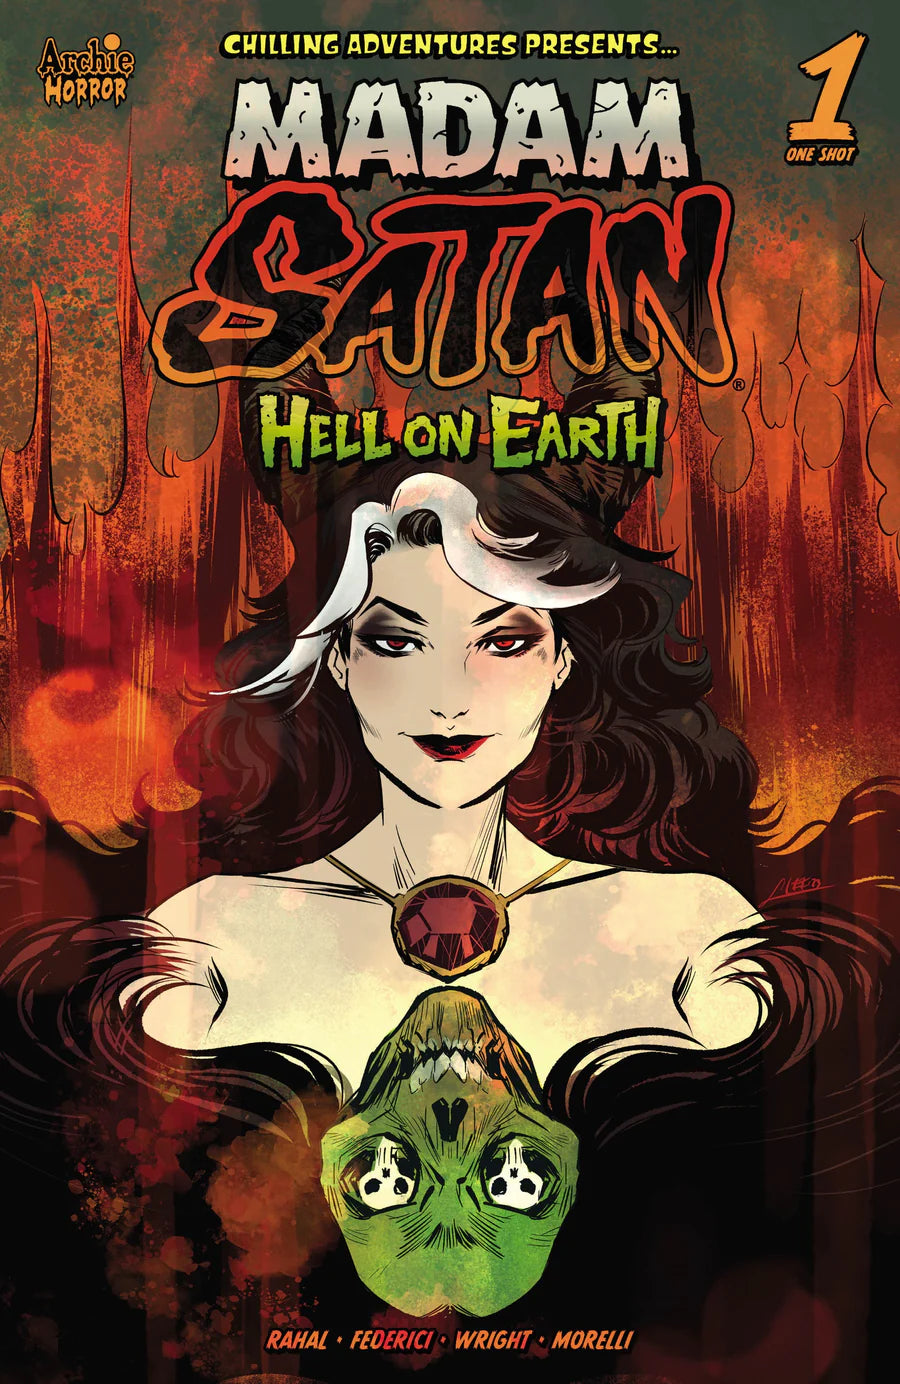 CHILLING ADVENTURES PRESENTS... MADAM SATAN: HELL ON EARTH O.S.